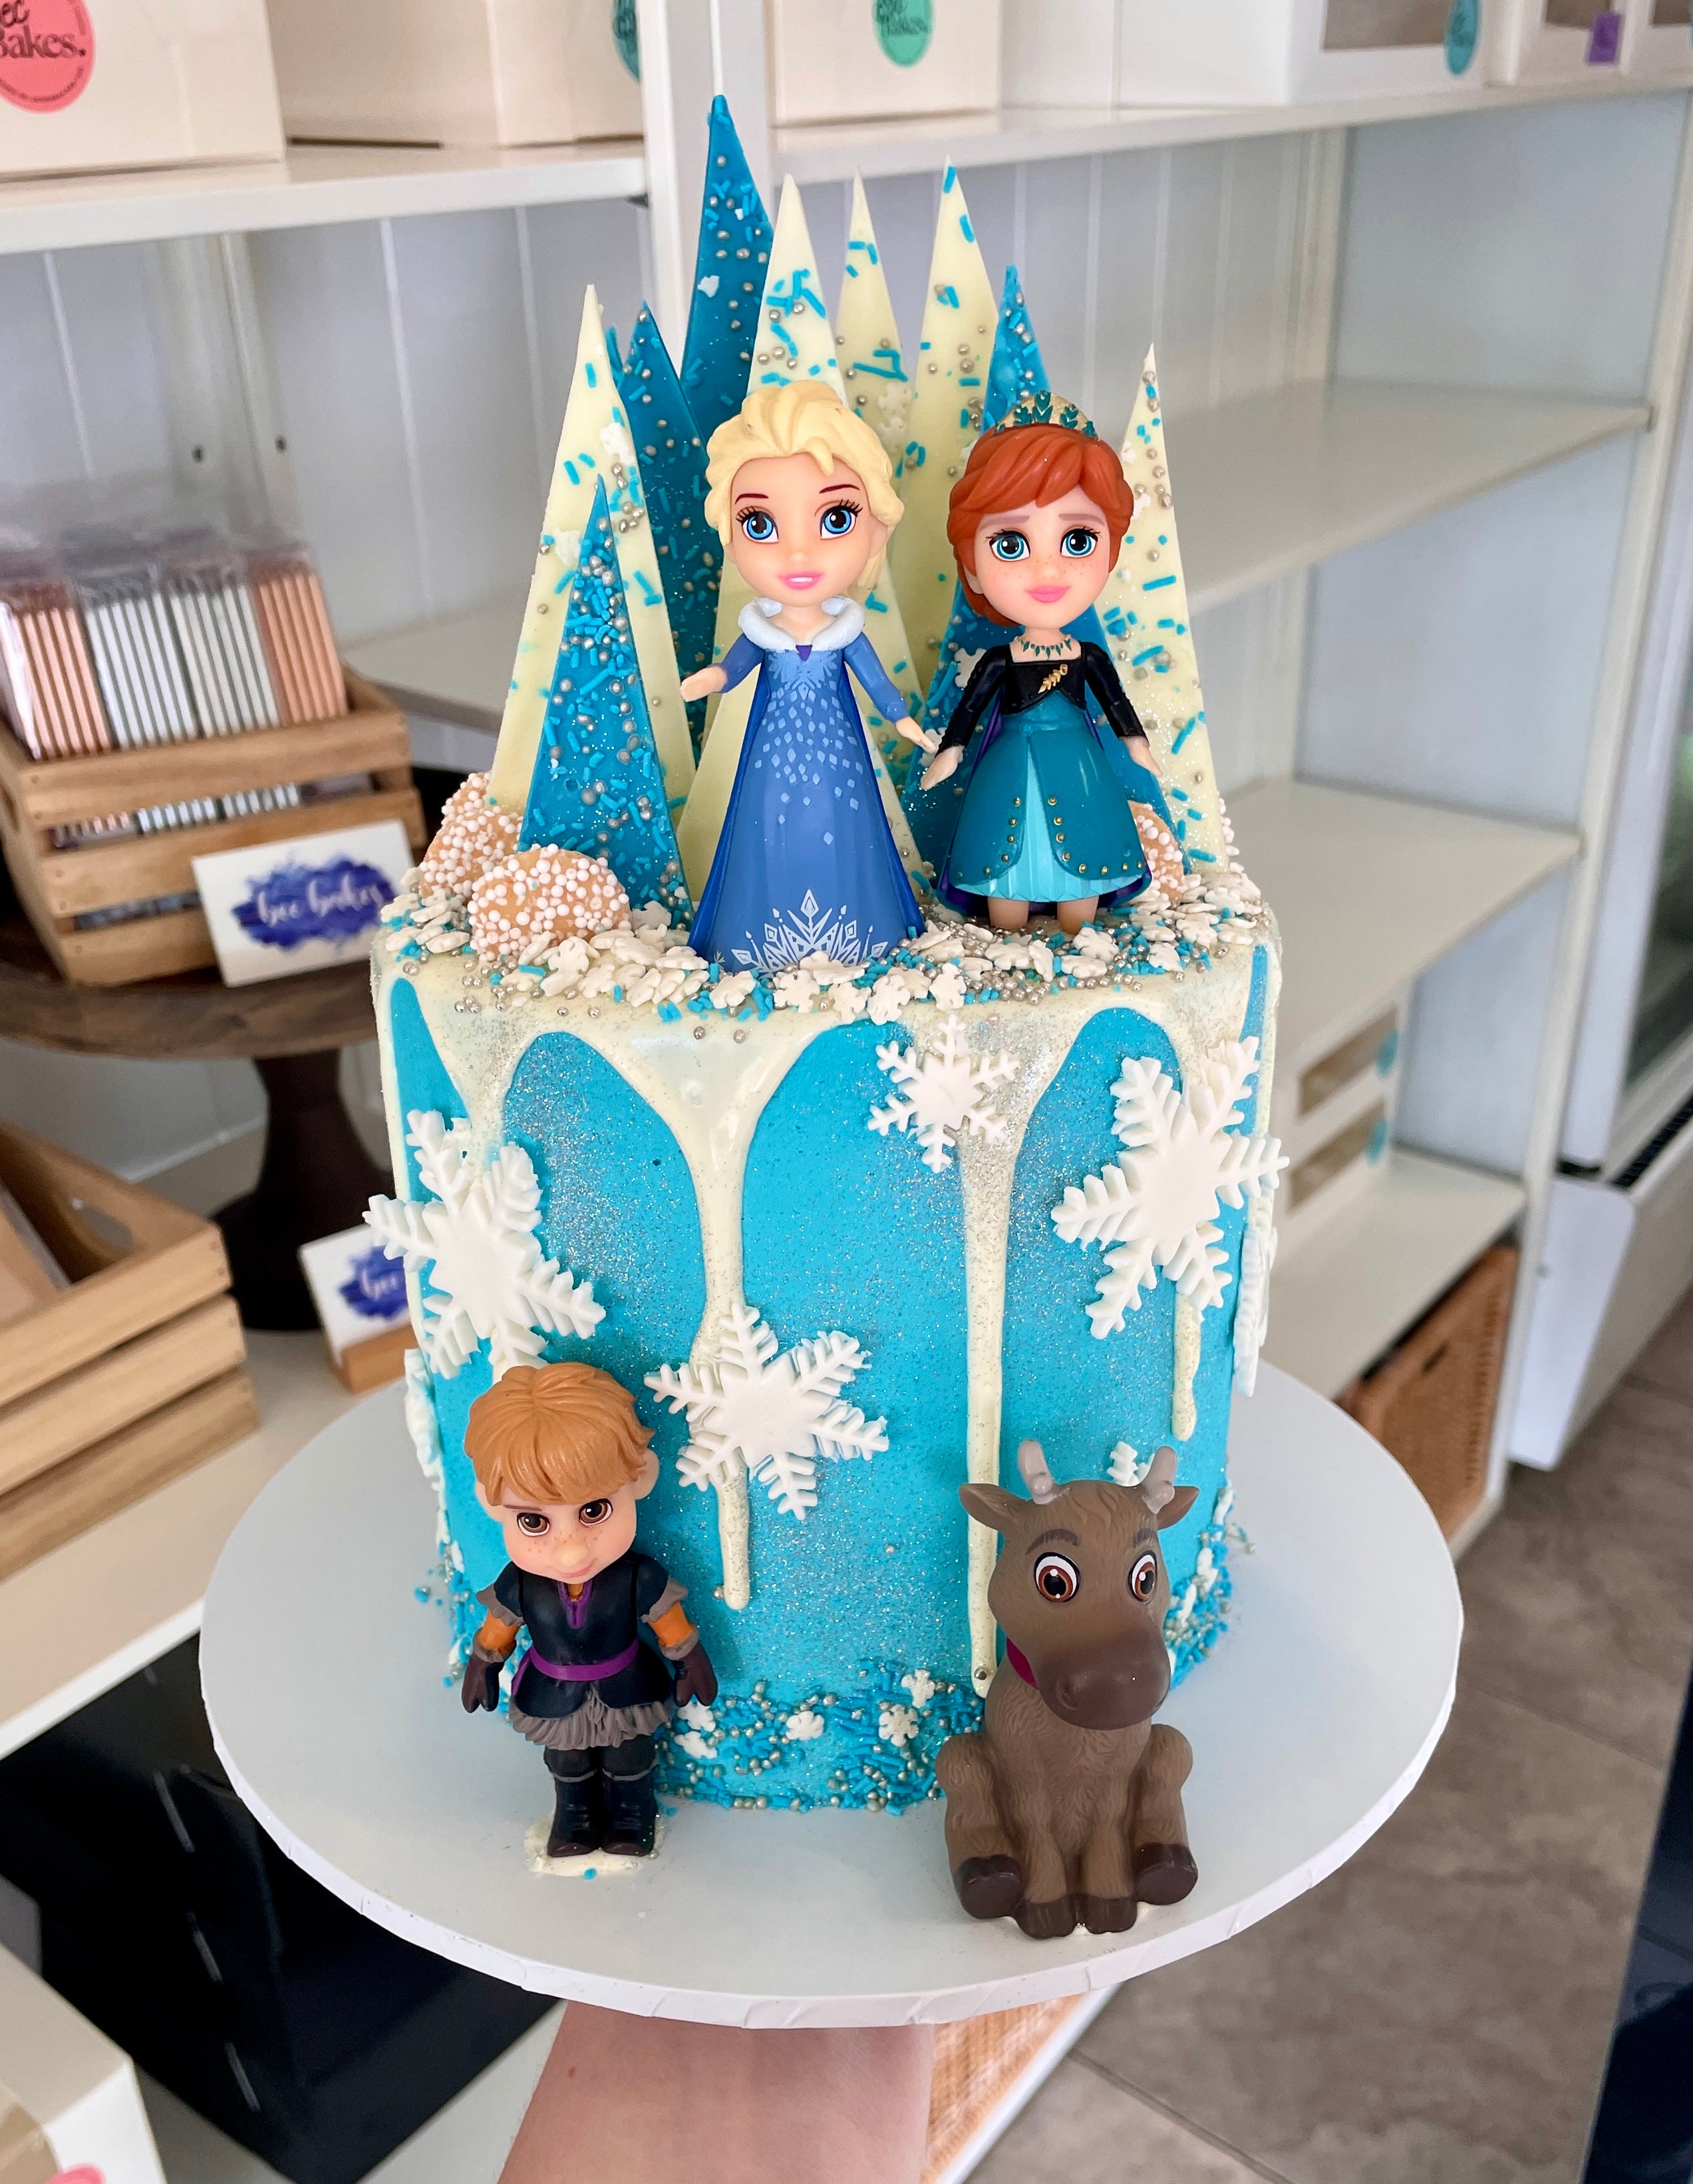 Frozen Elsa Cake - Buy Online, Free Next Day Delivery — New Cakes